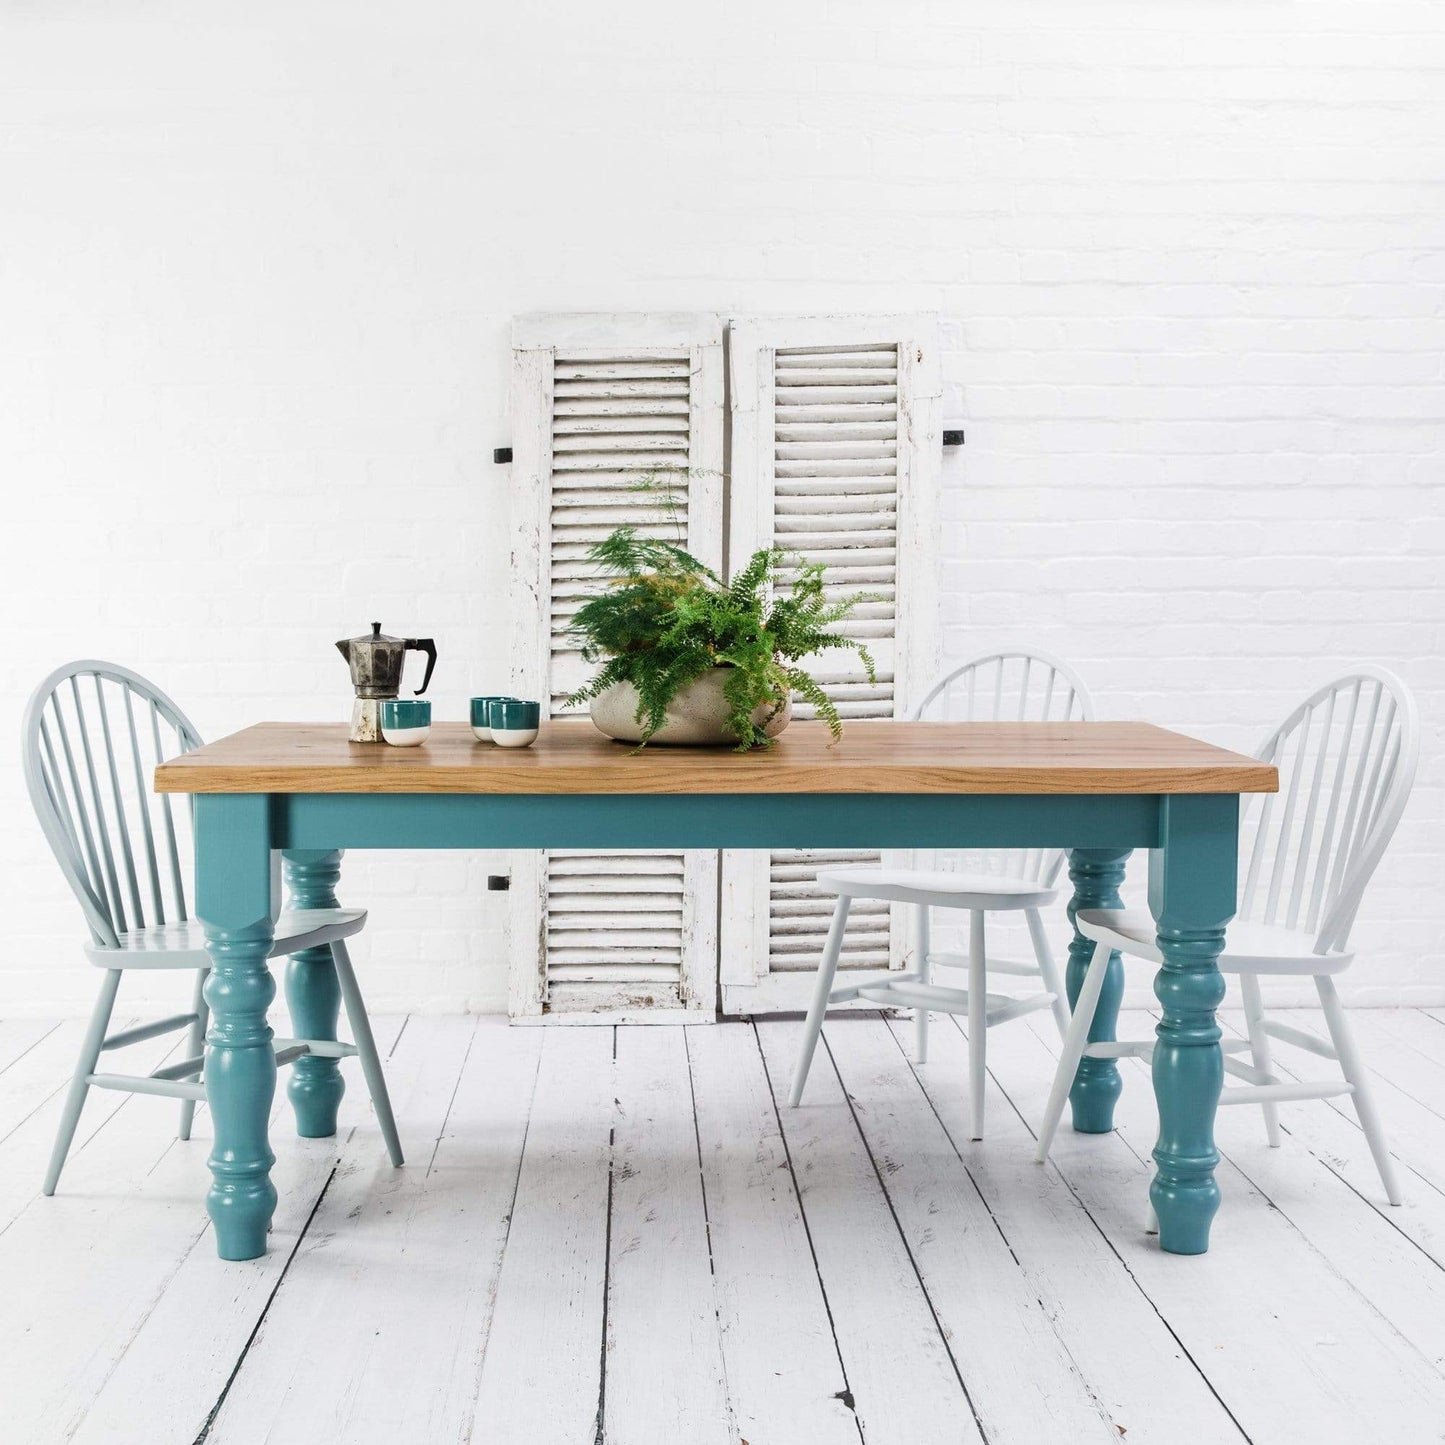 A rustic oak dining table with white chairs, perfect for your interior decor.